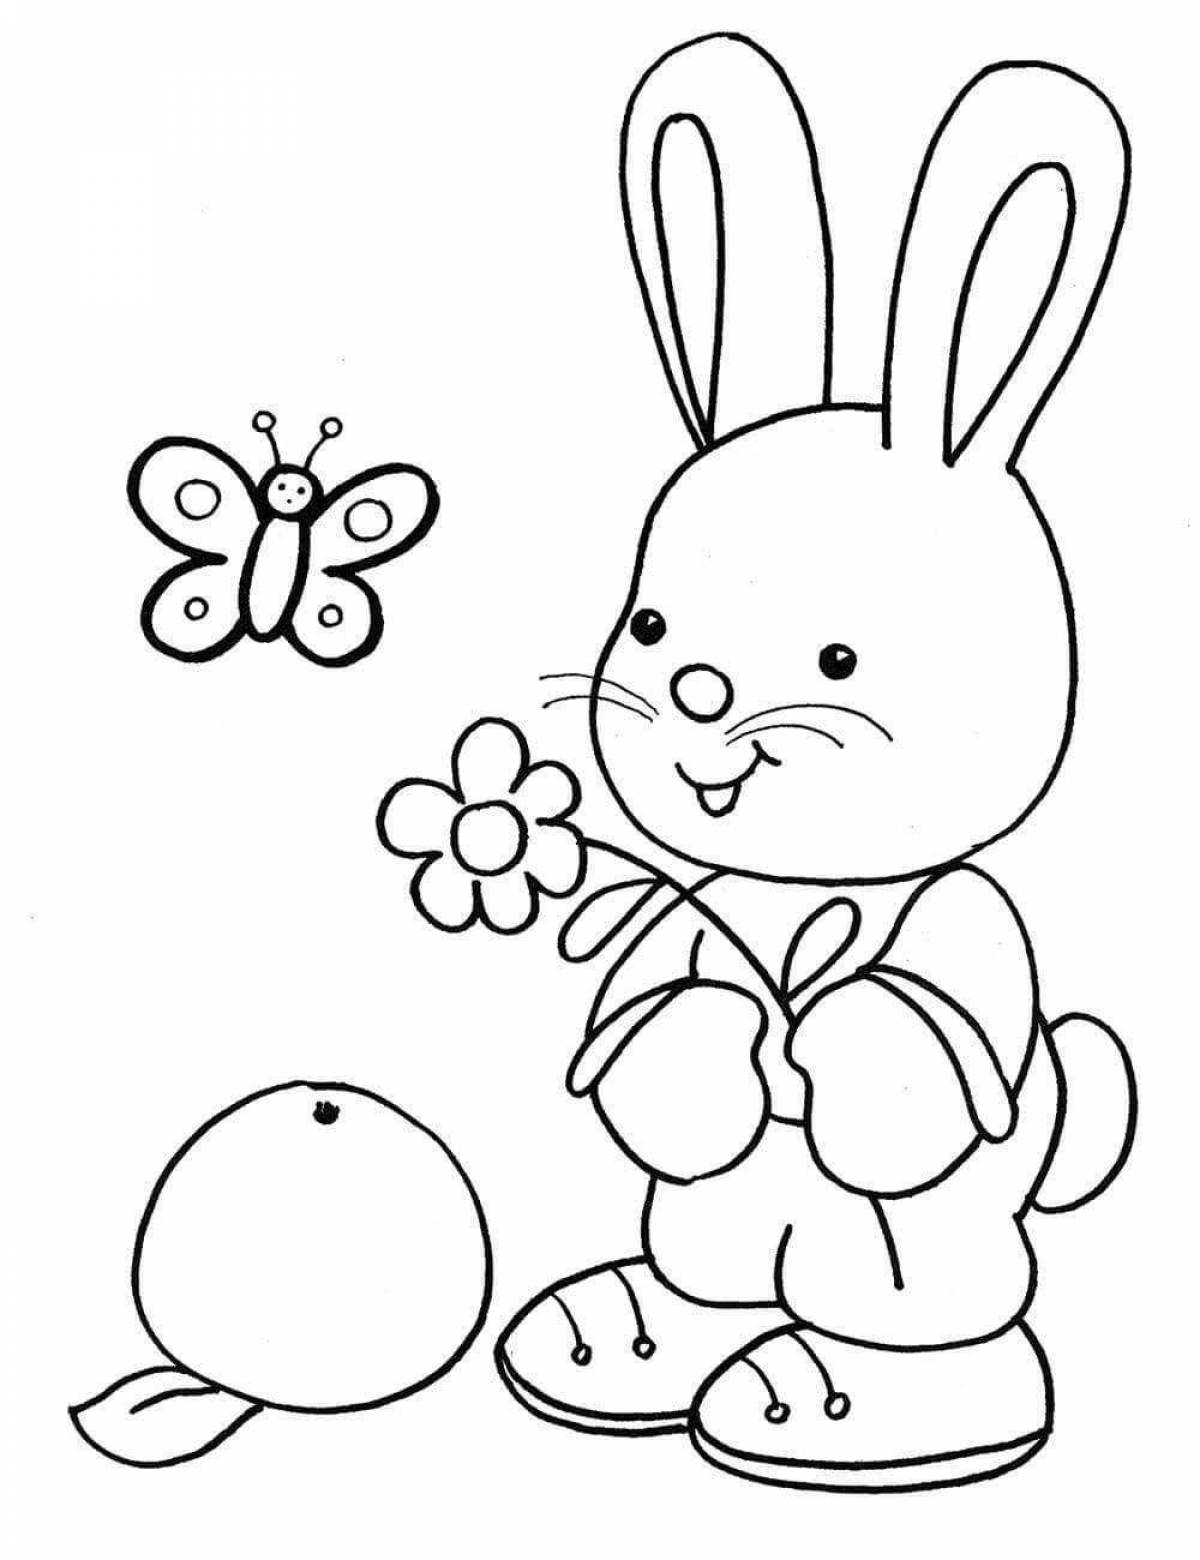 Radiant coloring page 3 for girls